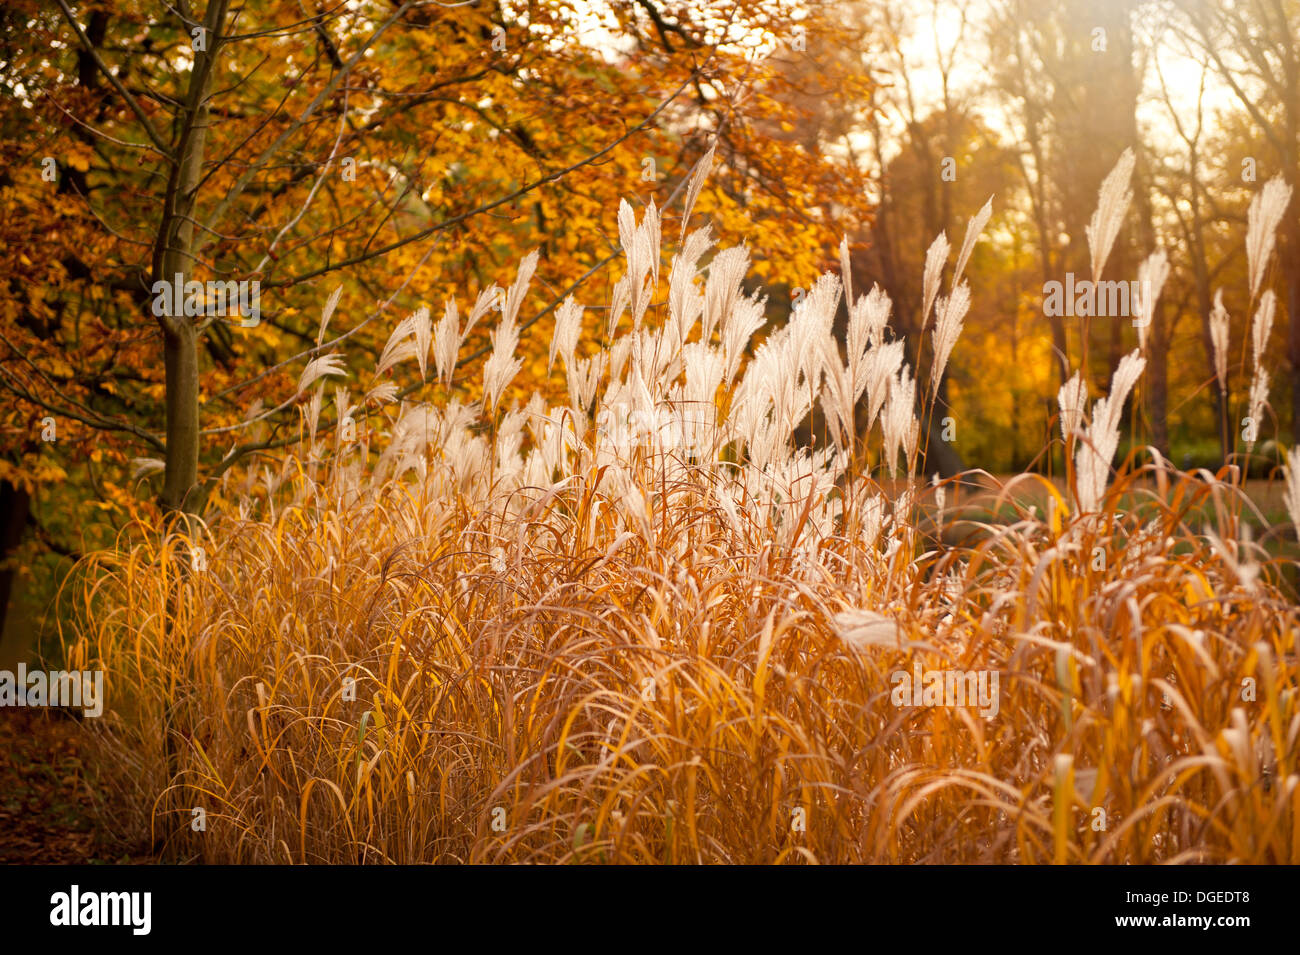 Miscanthus ornamental grass growing in park Stock Photo